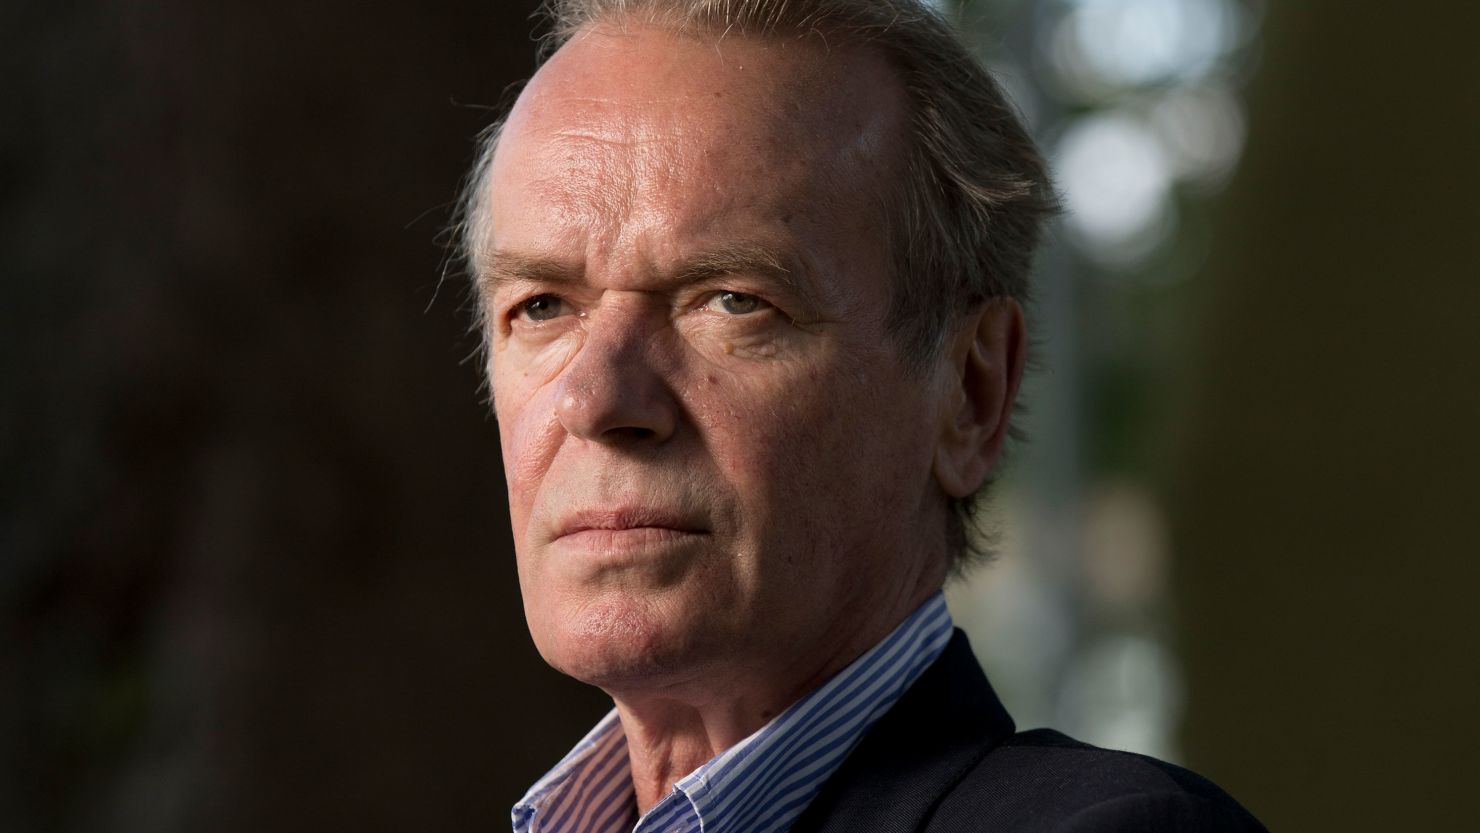 Legendary, bestselling British author Martin Amis, pictured at the Edinburgh International Book Festival where he talked about his new novel entitled 'The Zone of Interest'. The three-week event is the world's biggest literary festival and is held during the annual Edinburgh Festival. The 2014 event featured talks and presentations by more than 500 authors from around the world and was the 31st edition of the festival. (Photo by Colin McPherson/Corbis via Getty Images)